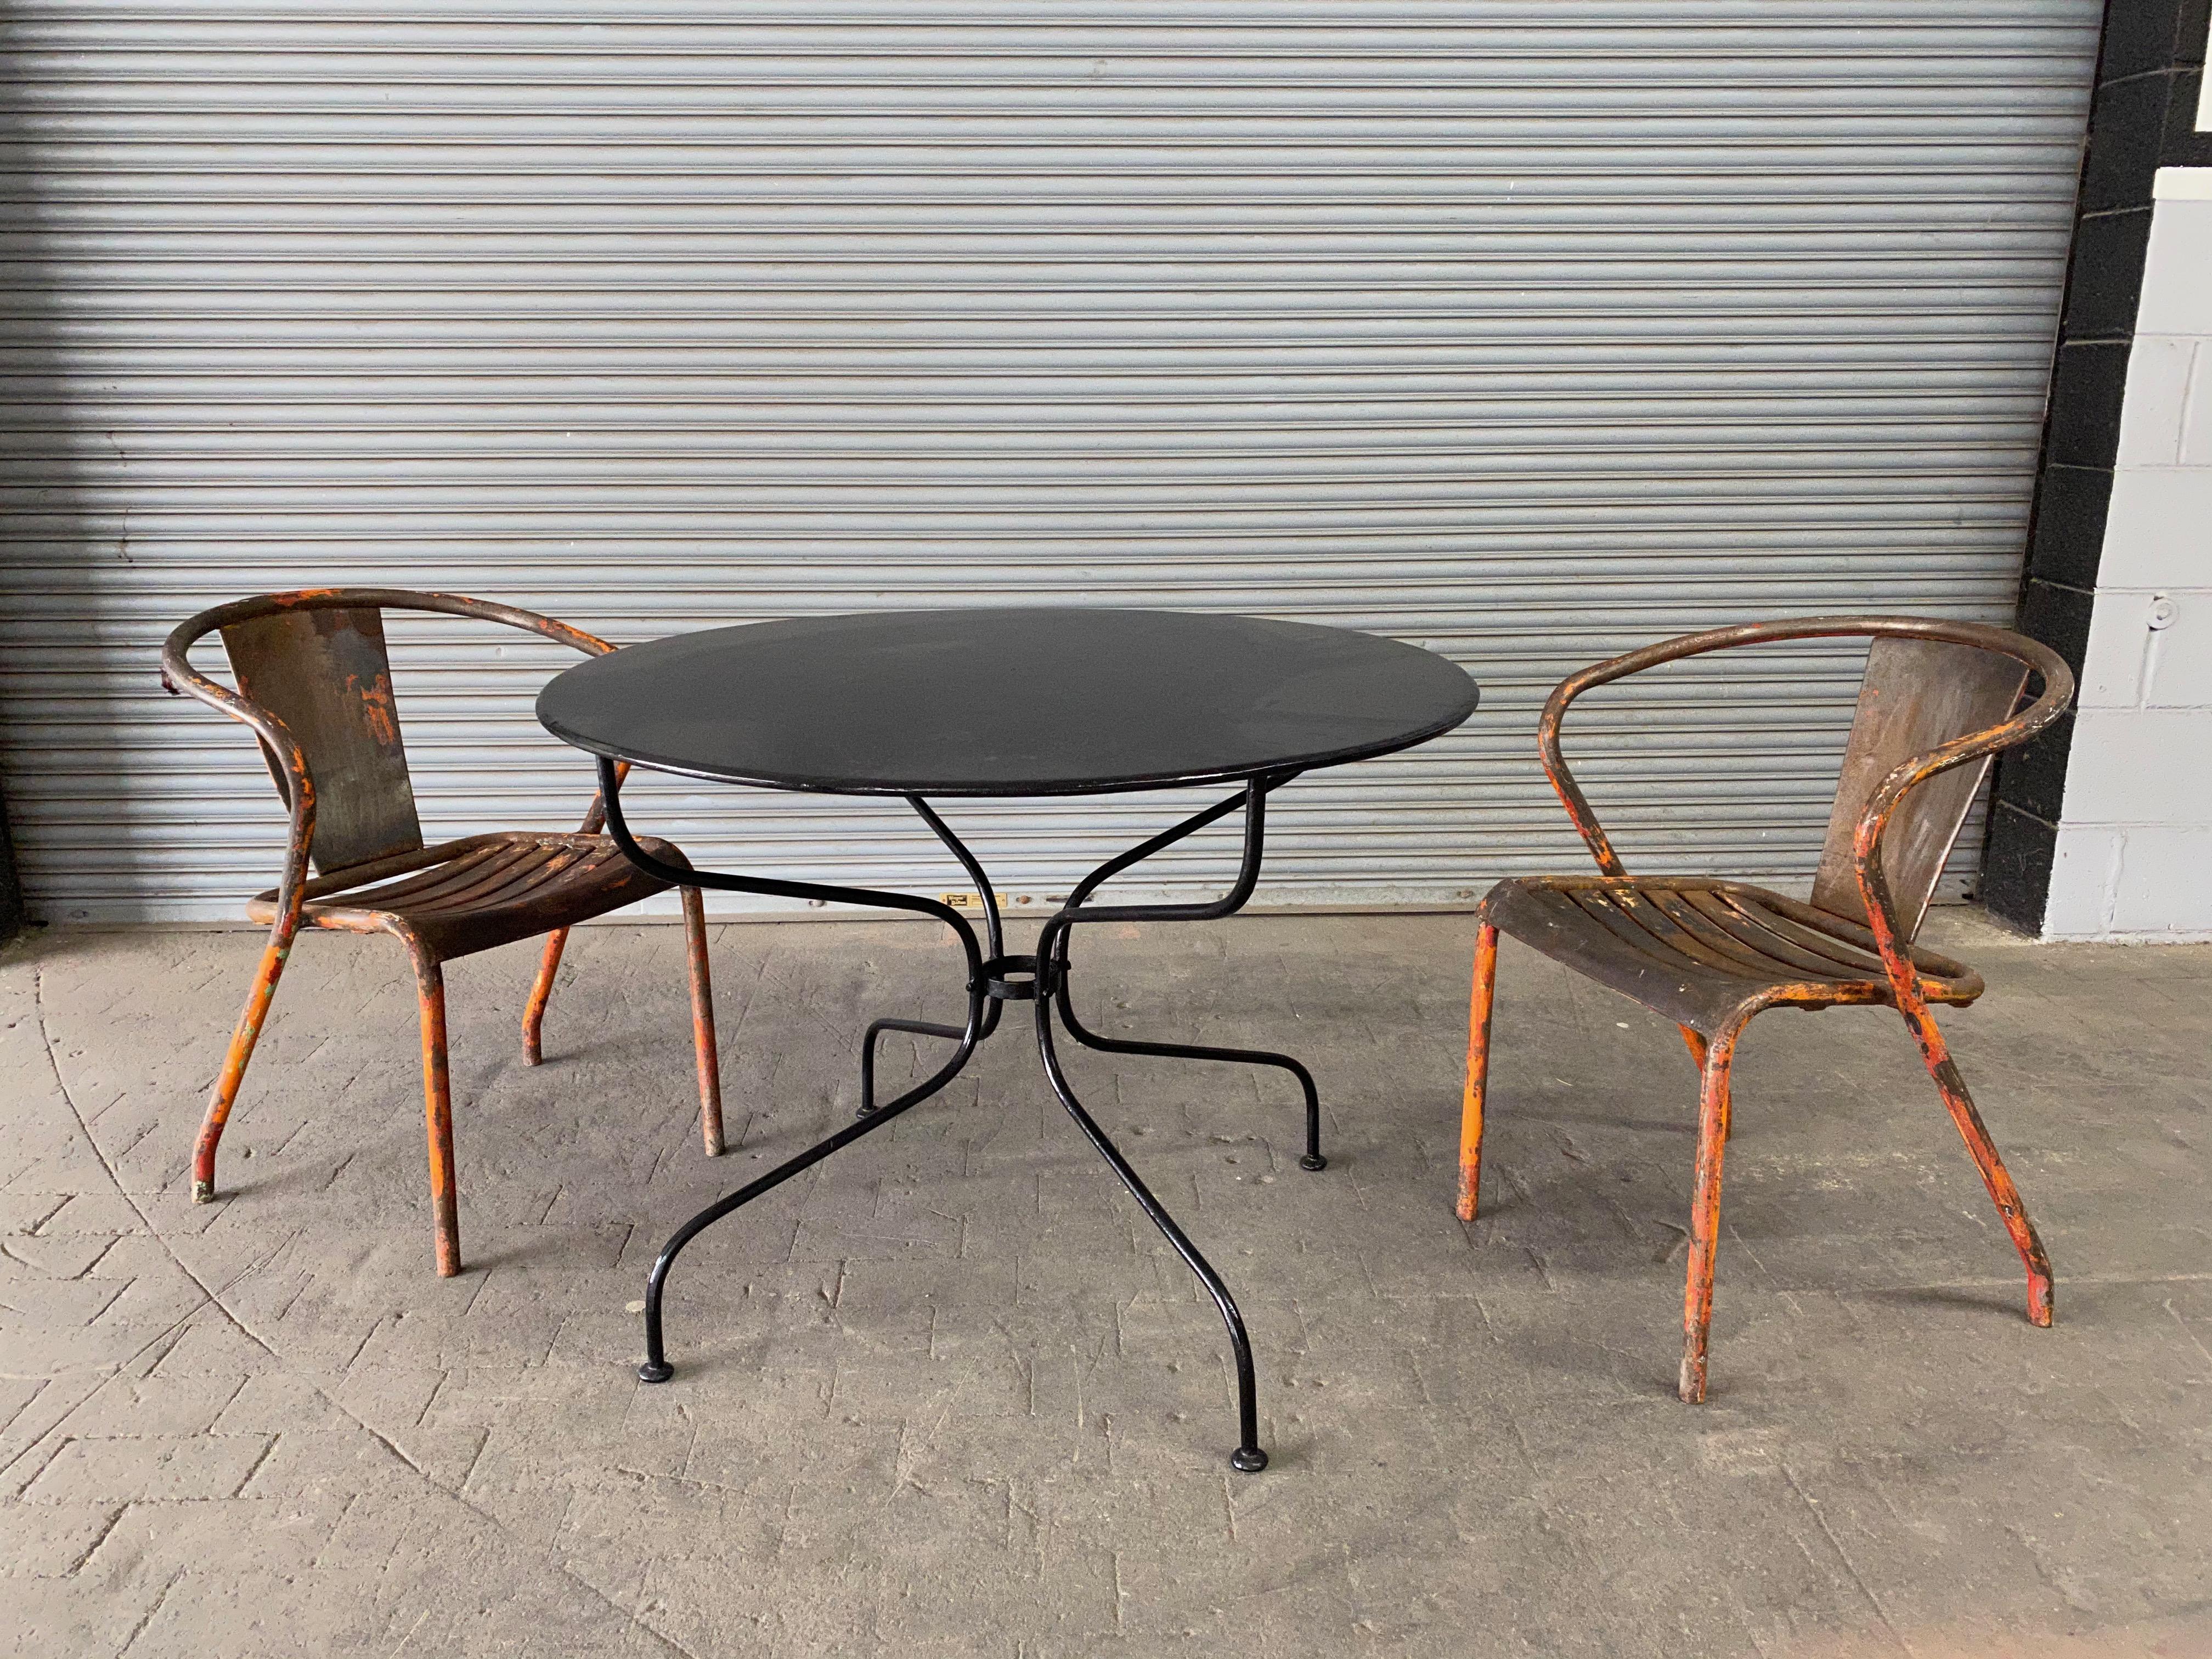 Pair of French Tolix Industrial Chairs with Distressed Orange Paint Finish 10